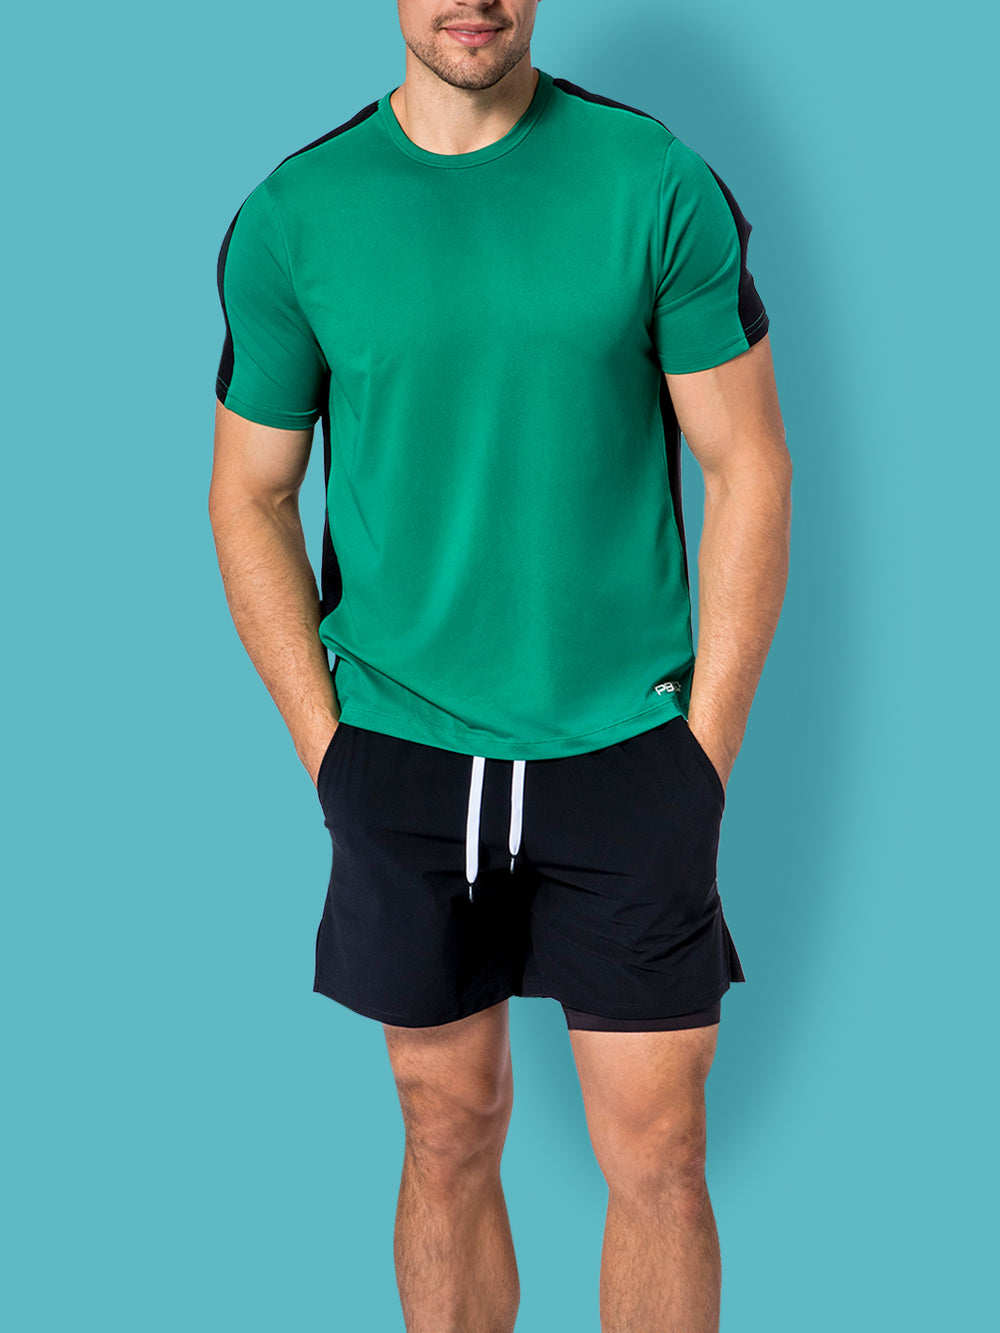 Man in PB5star black Signature Court Shorts and jade Performance Tee, ready for peak performance in any sport.